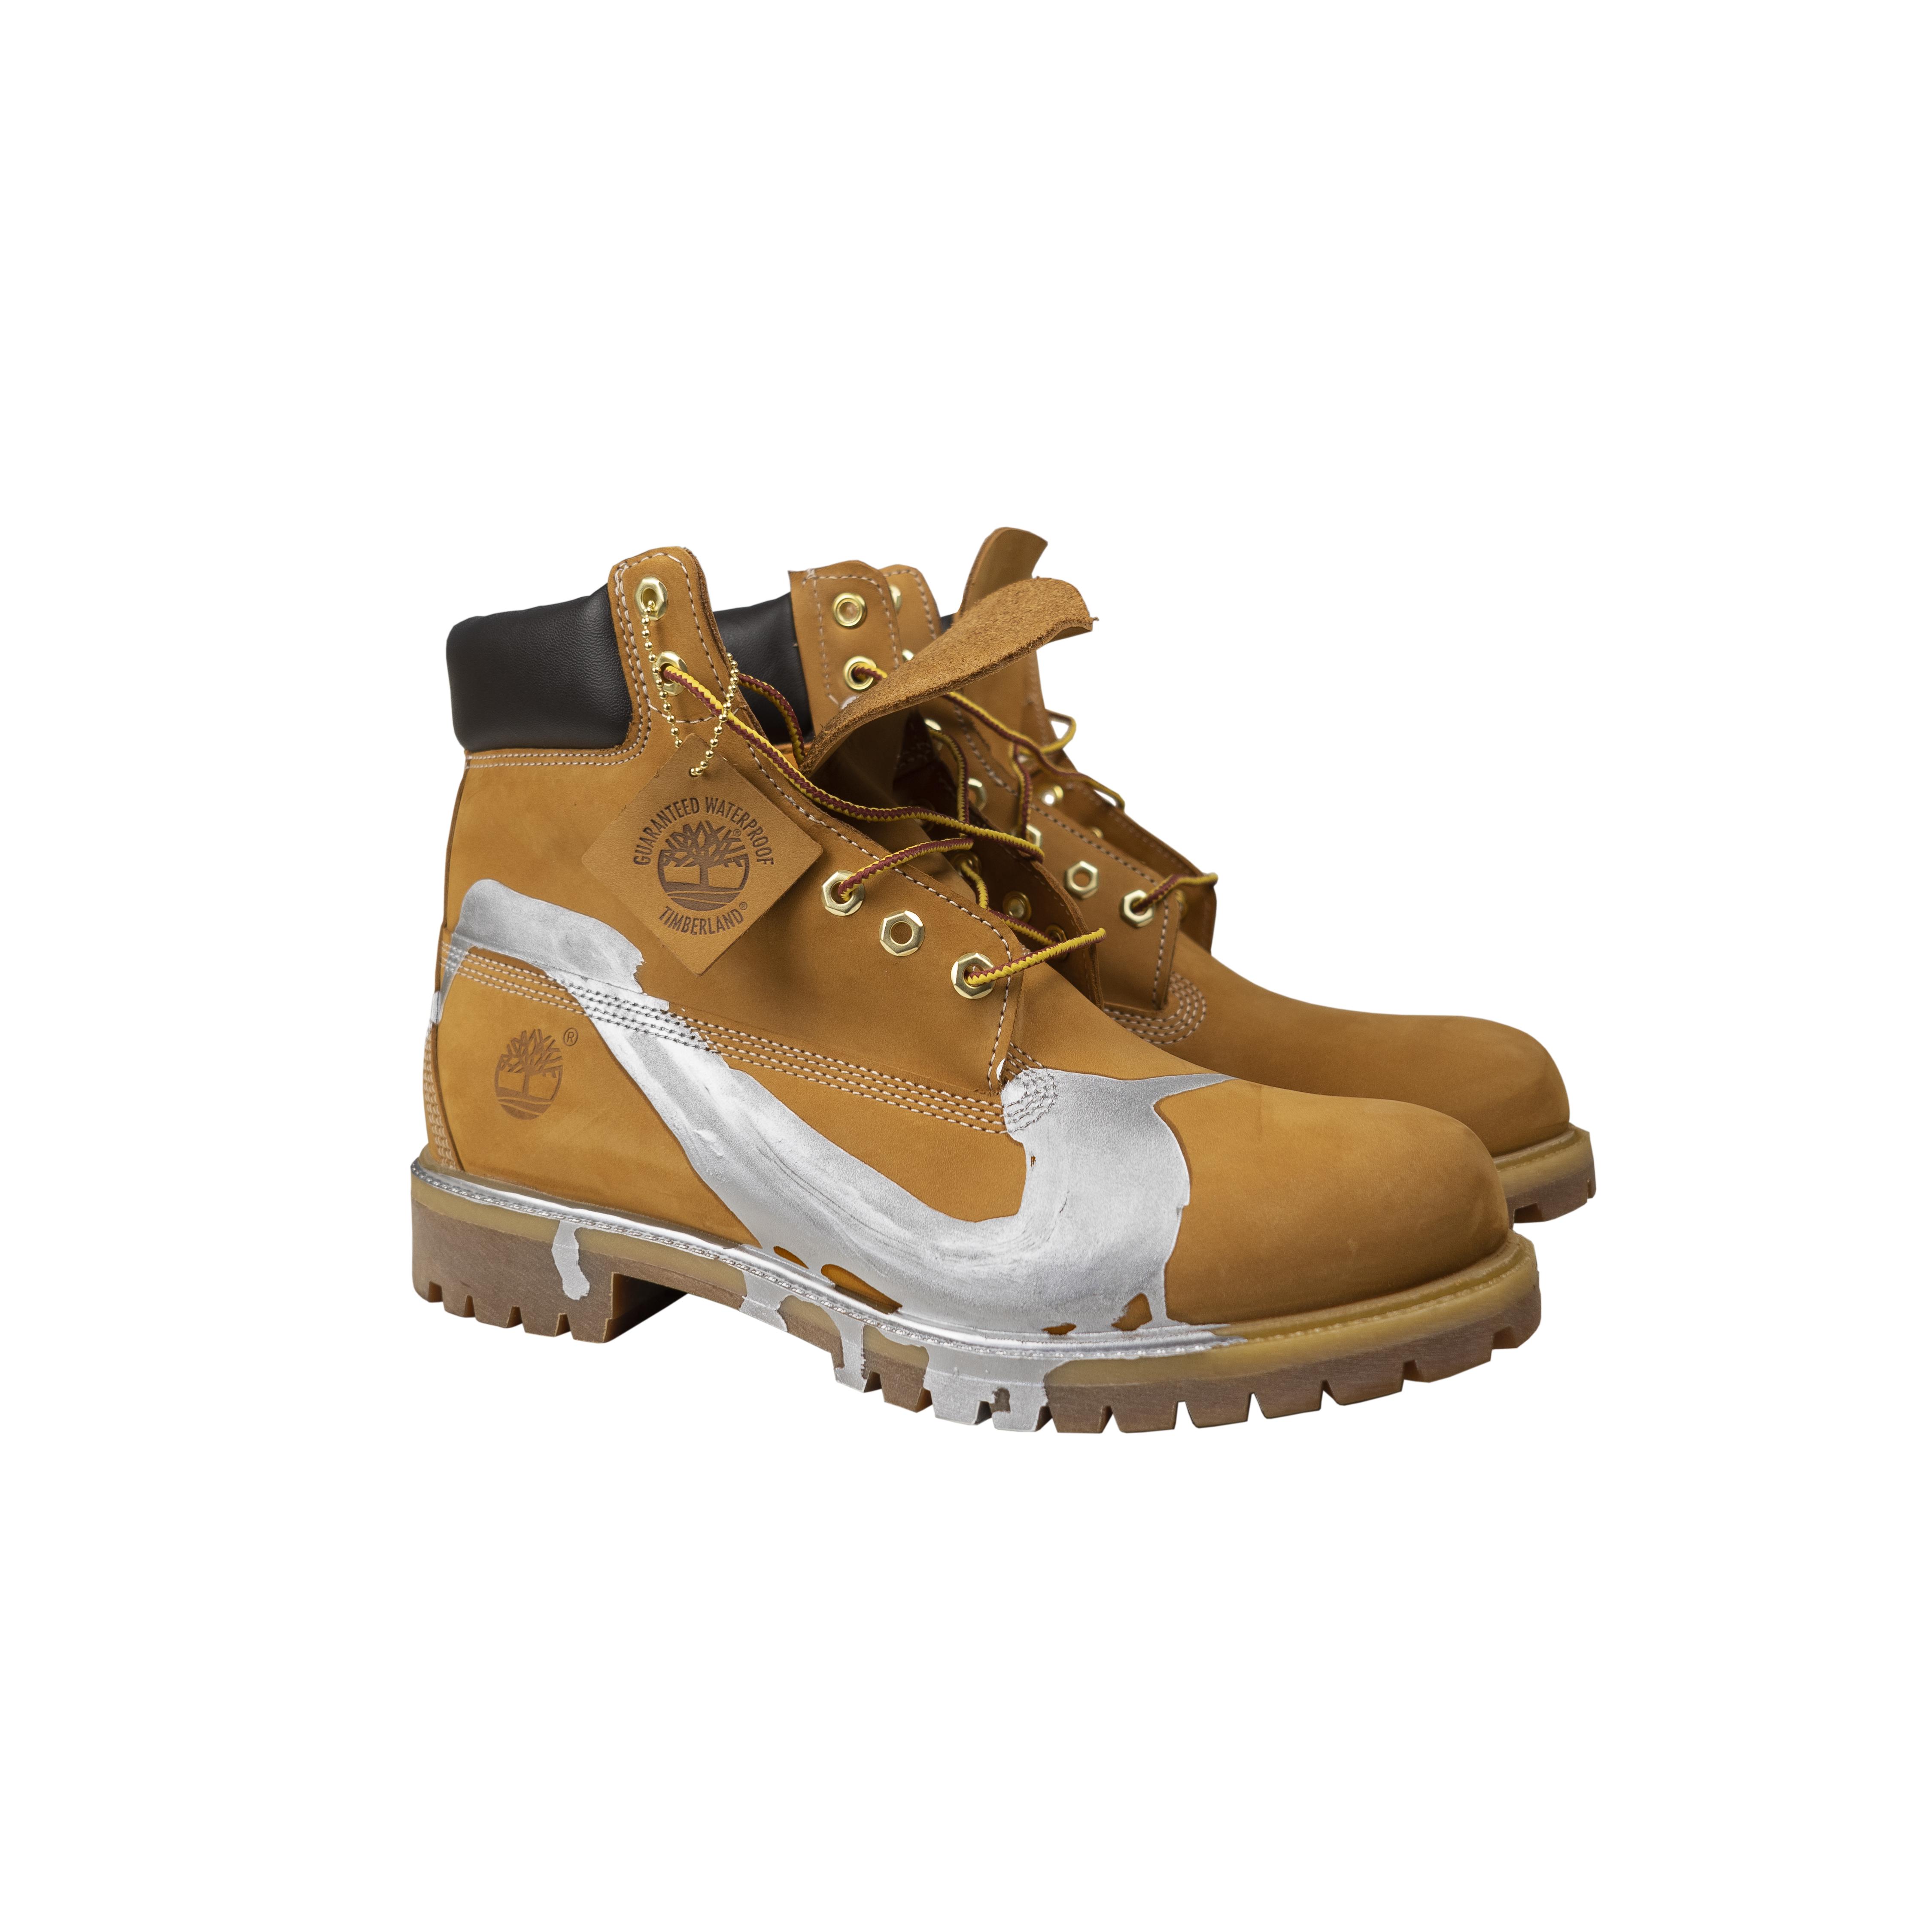 Timbs Start Nike Airs Me - Worksite